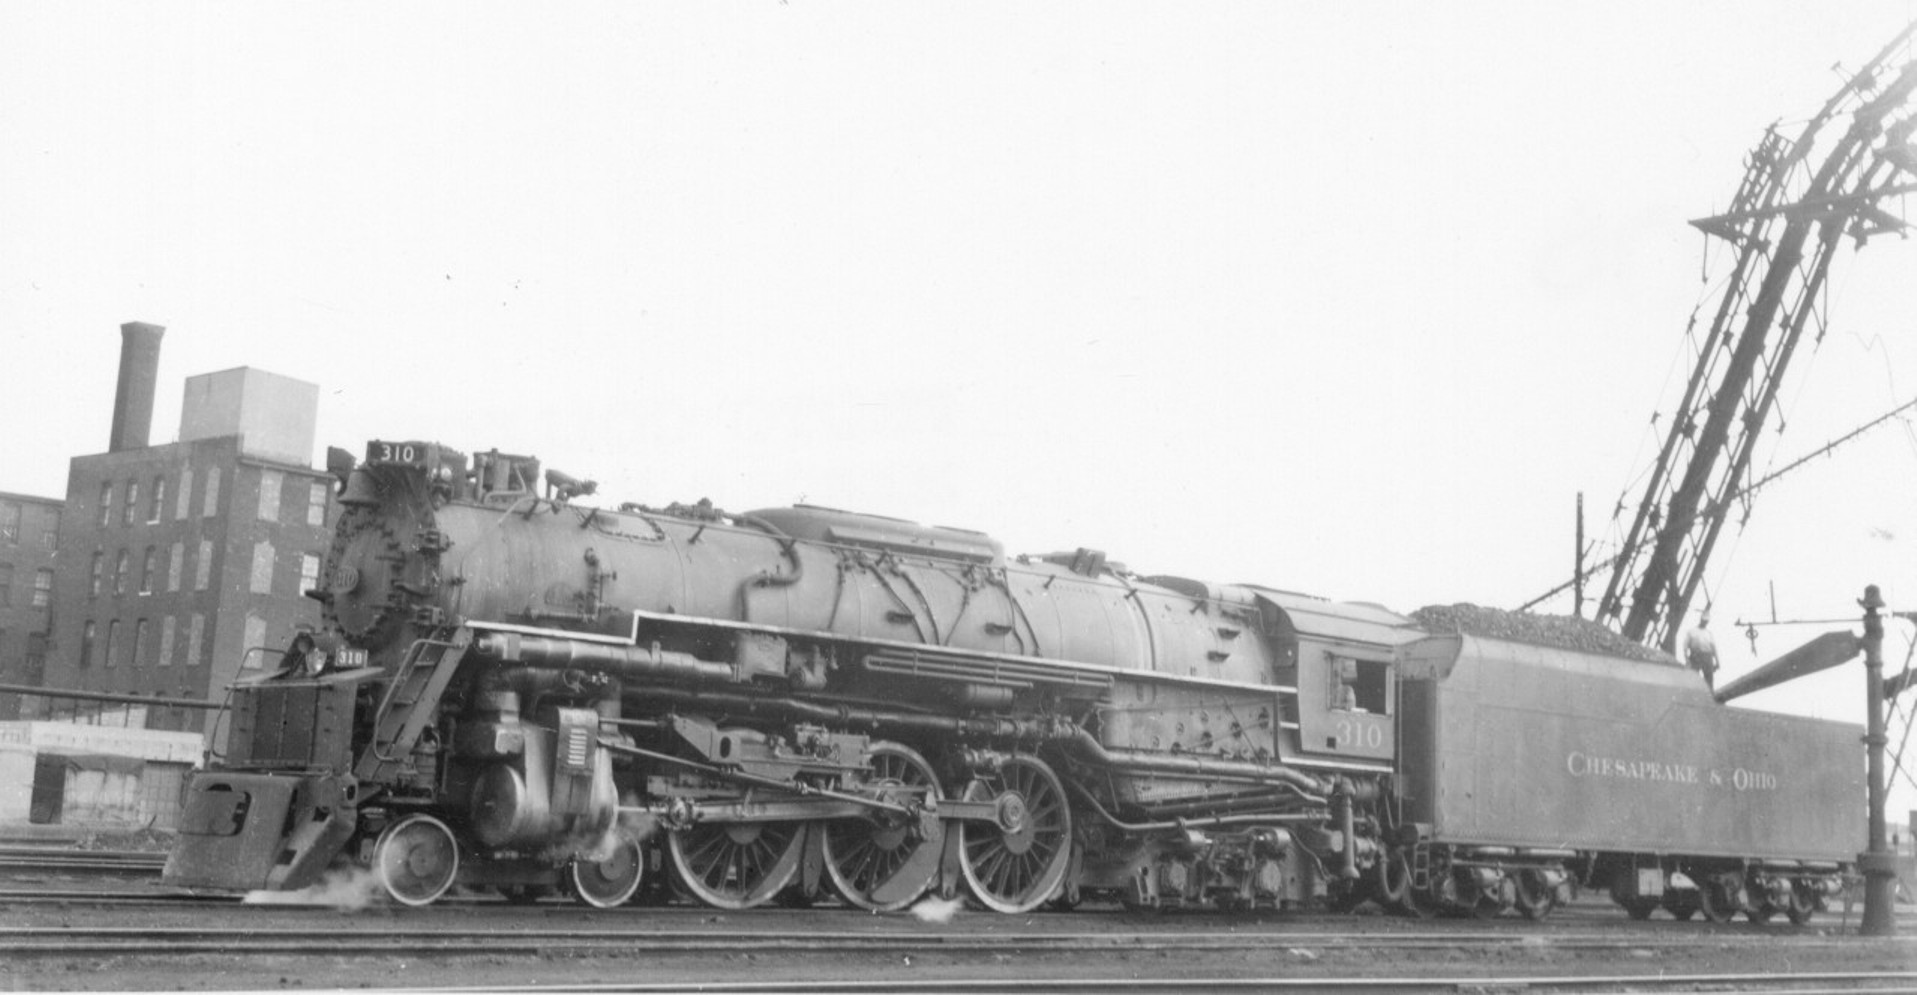 C&O 310, class L2a 4-6-4 Hudson type on ready track at Cincinnati Union Terminal service area, September 1950. Built by Baldwin in 1948, the L2a's were the world's largest Hudson types, dwarfing those of the New York Central and weighing in slightly heavier than those of AT&SF. They featured Franklin type B rotary cam poppet valves and 78" drivers. All were assigned to mainline passenger work on C&O's flatter western main lines, working between Cincinnati/Detroit and Hinton, WV. E-8 diesels bumped the Hudsons from passenger service in 1952 and all were out of service the following year. All were scrapped by 1955. View full size.